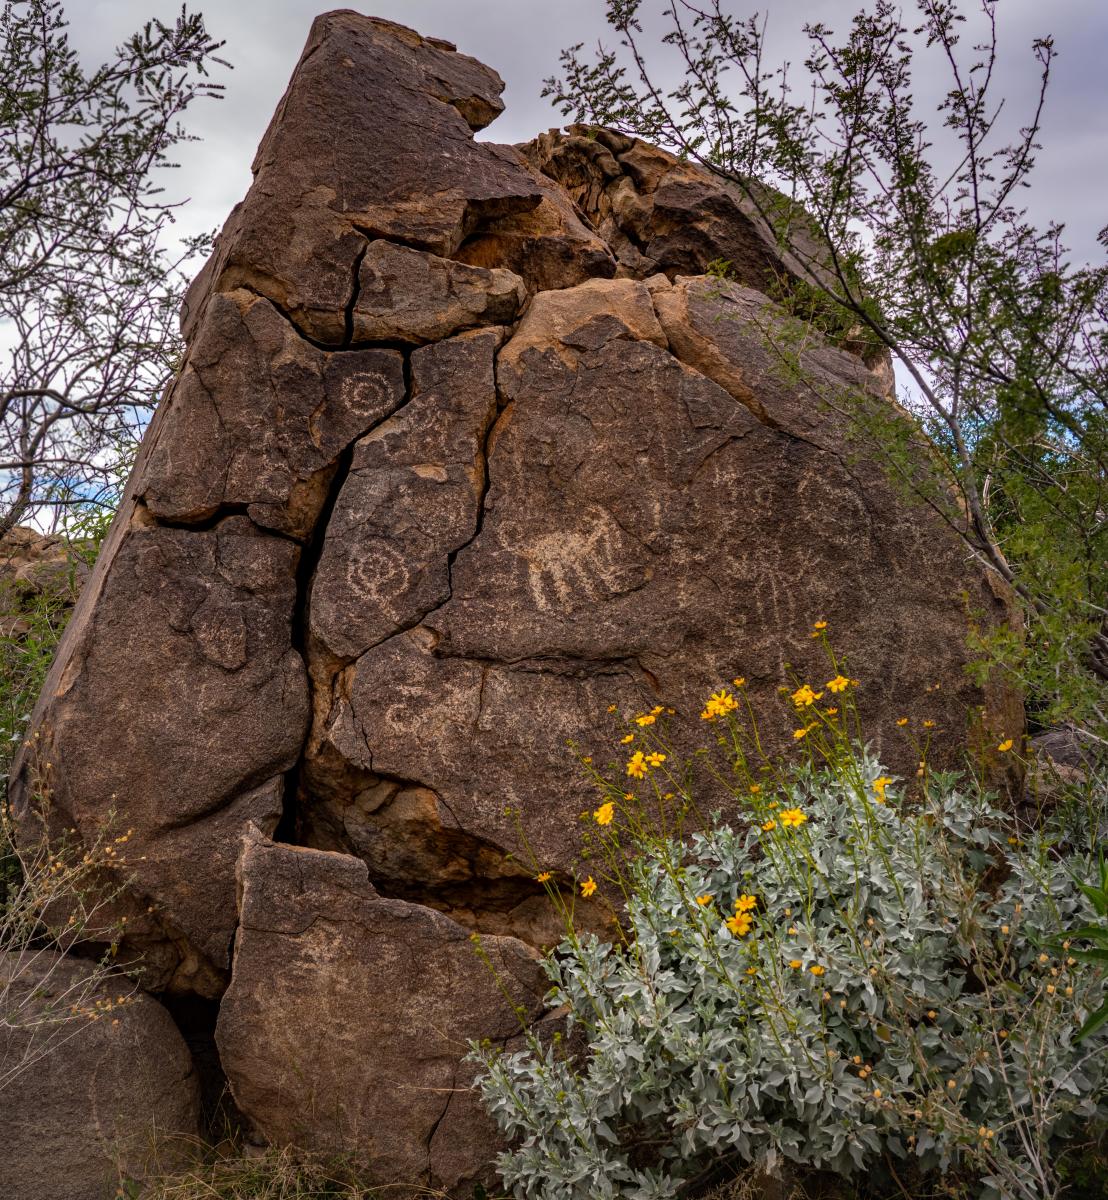 Large rock in the desert with ancient Petroglyphs drawn on it